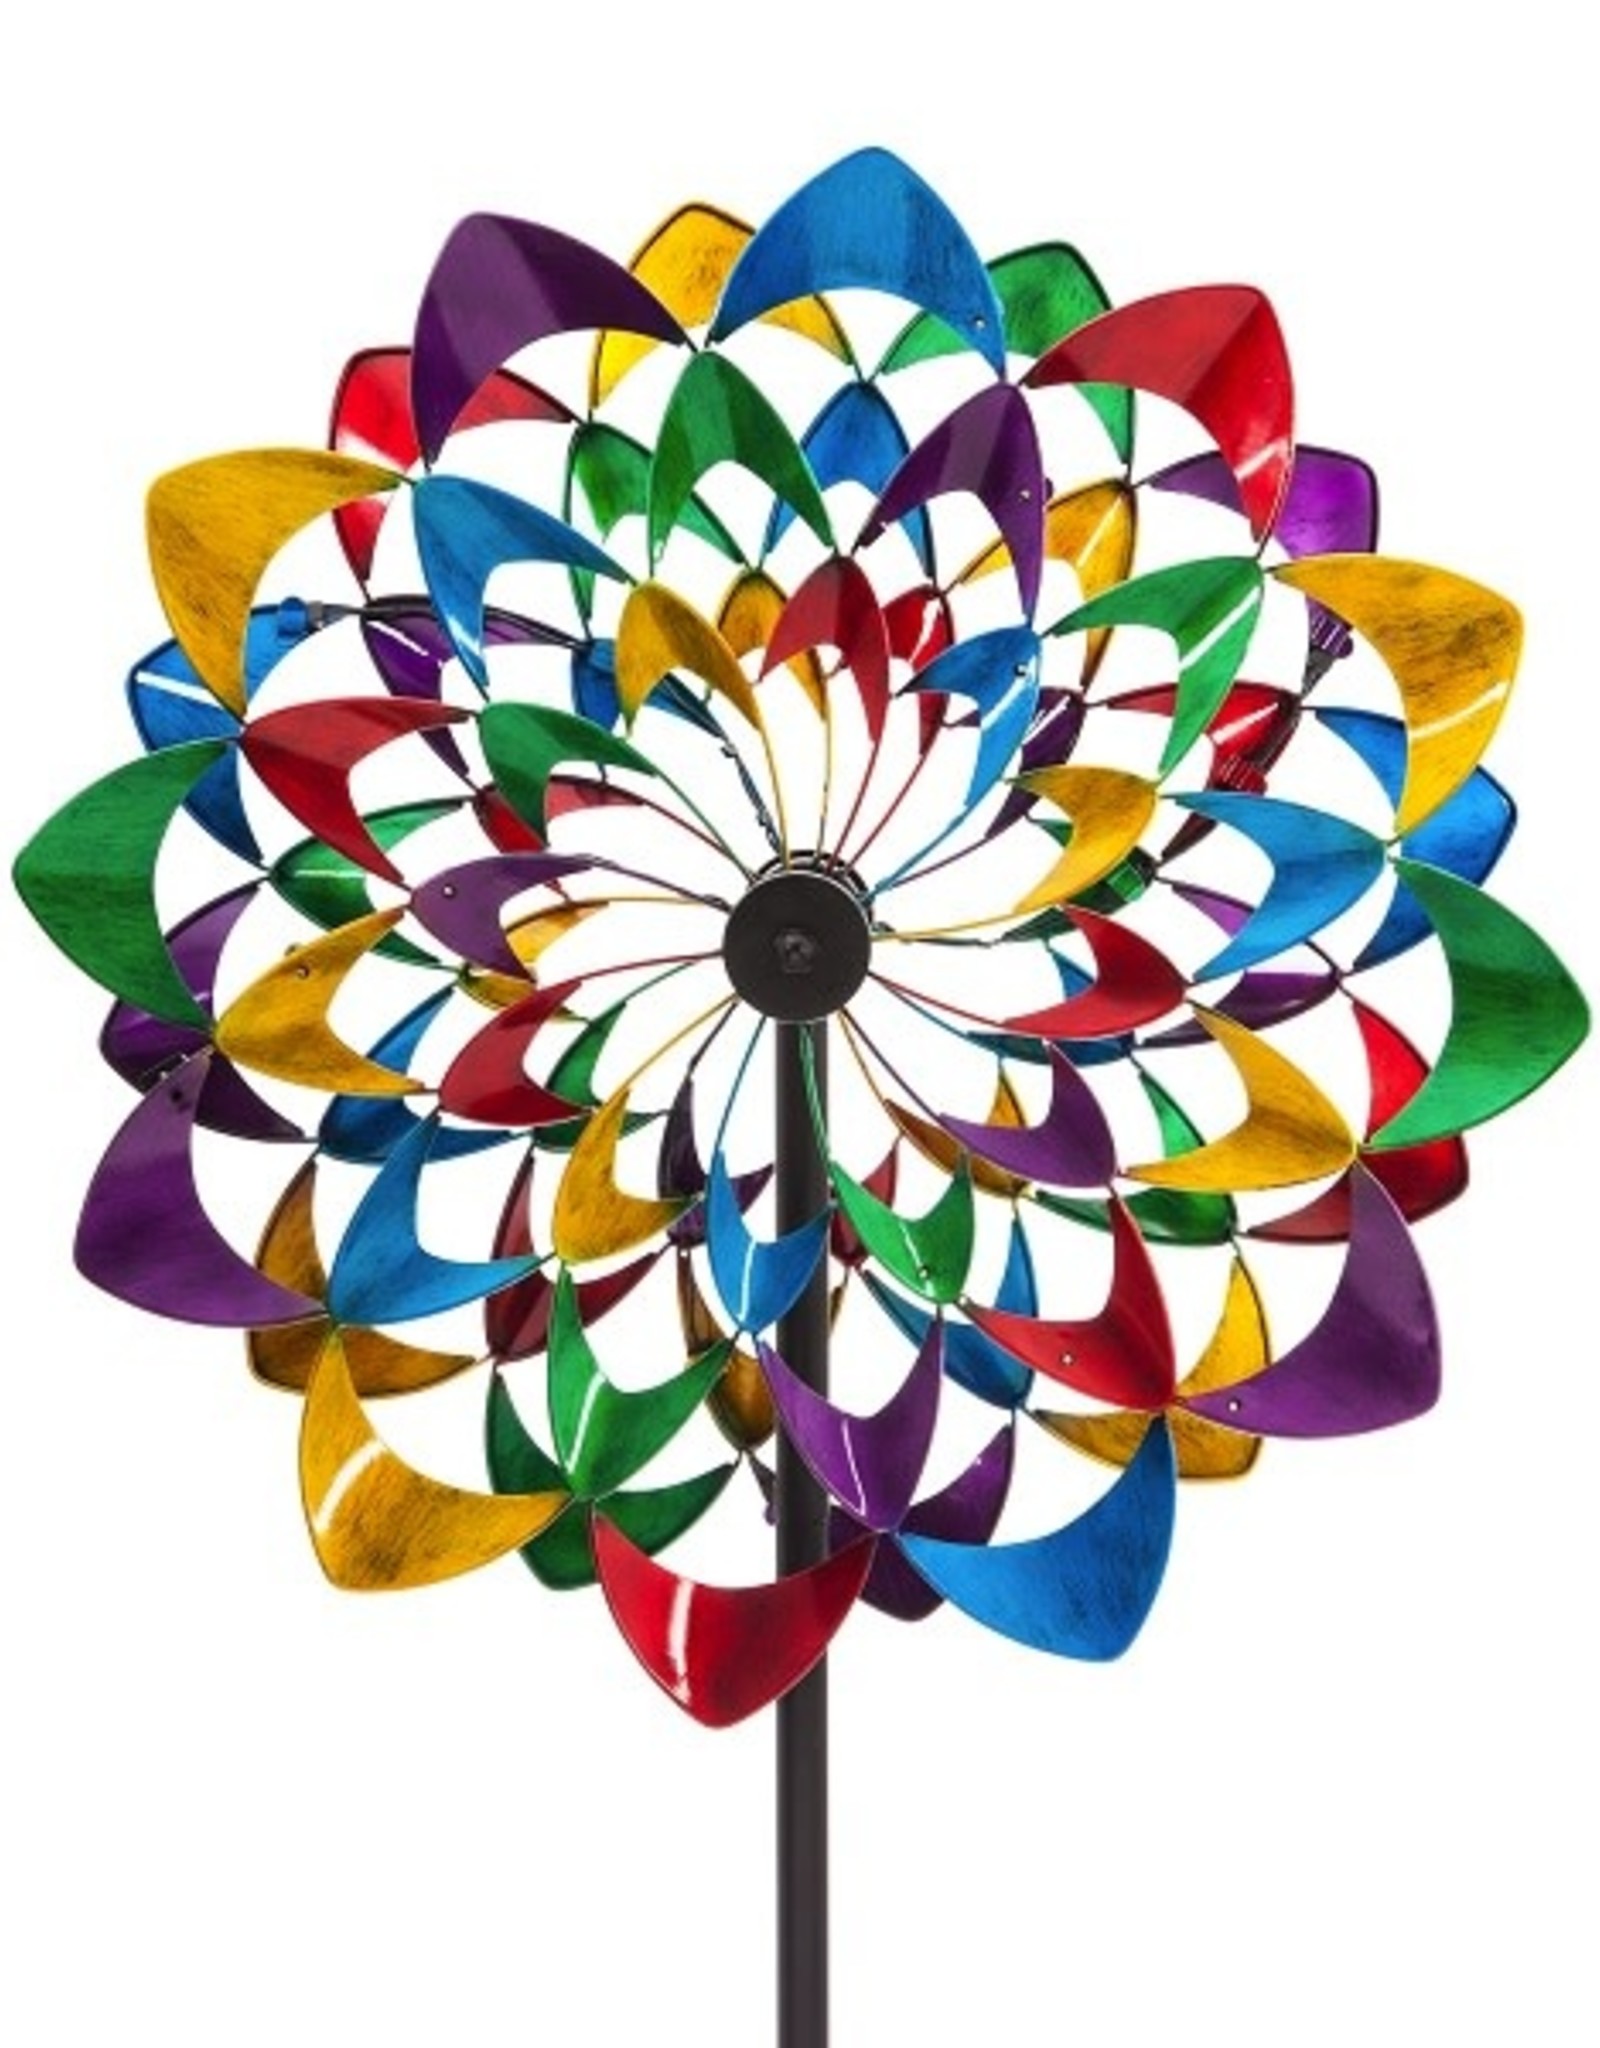 Evergreen COLORFUL WIND POWERED LIGHTED WIND SPINNER